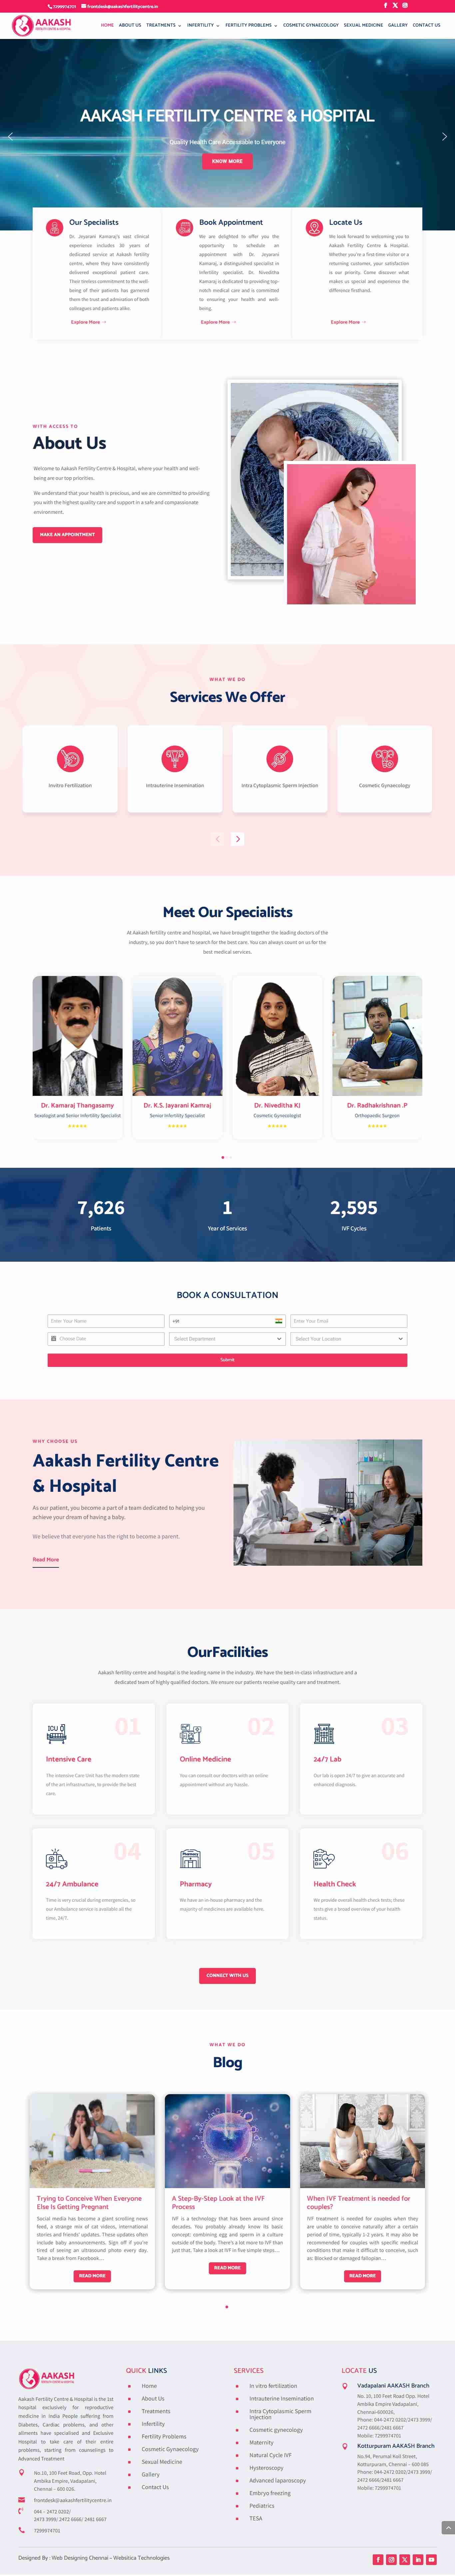 Aakash Fertility Centre.in